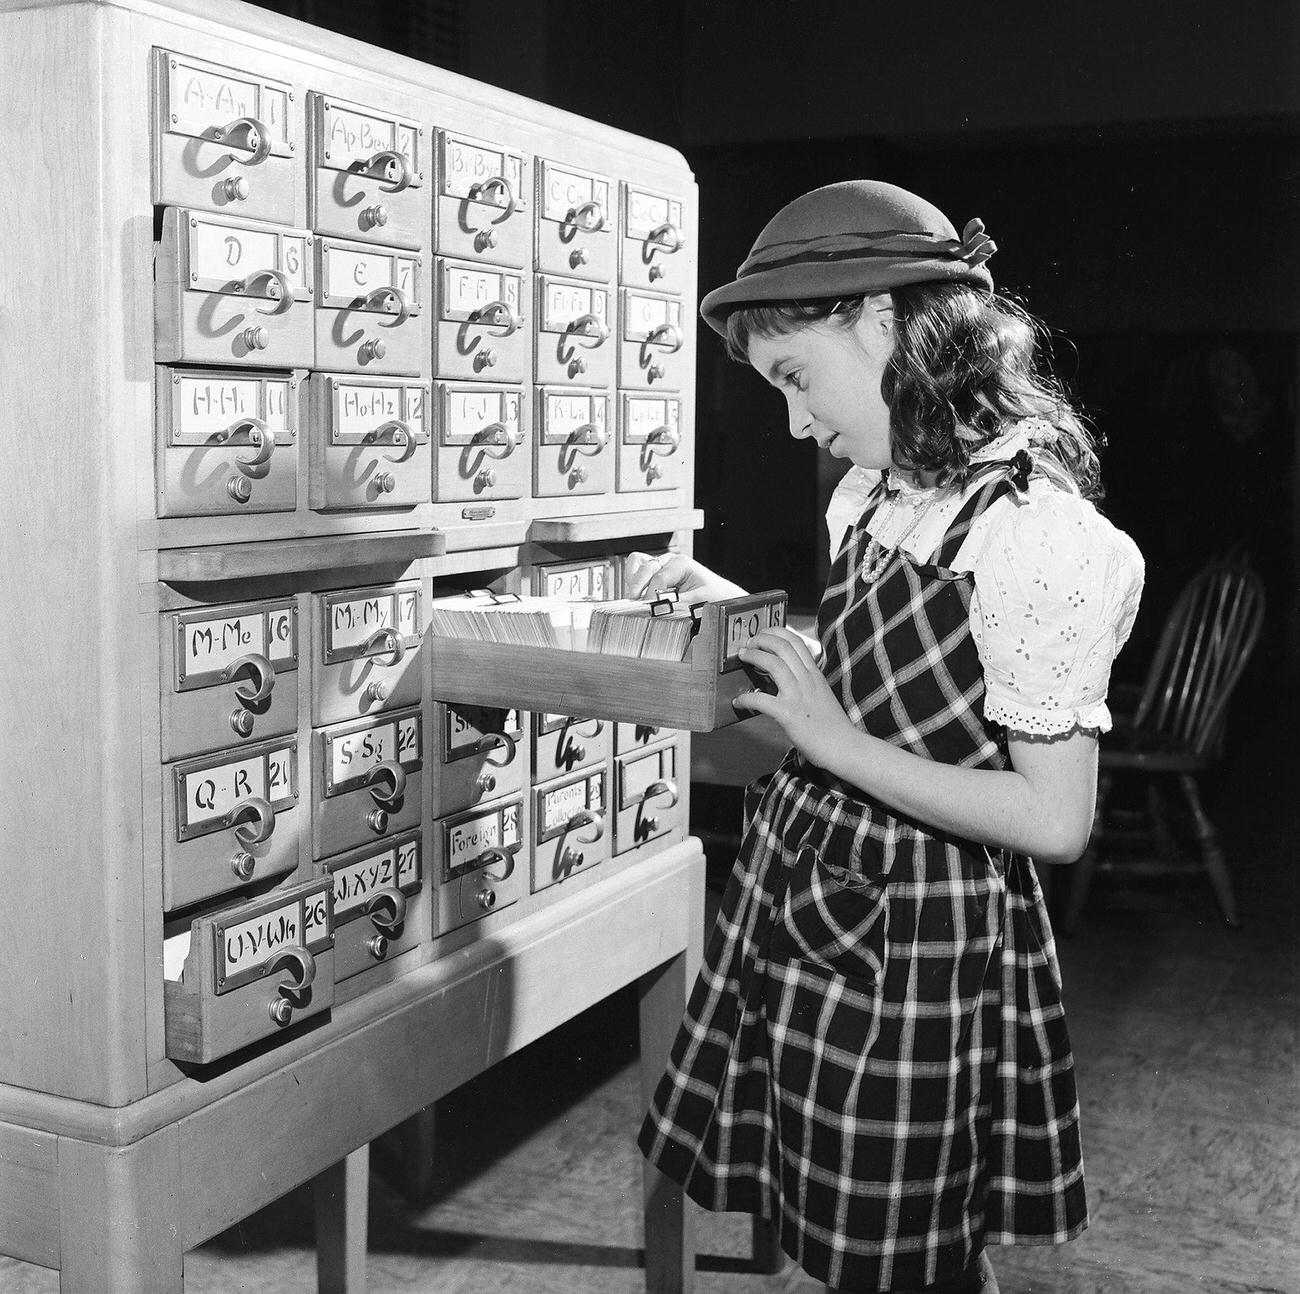 Girl Searches For Books Via Catalogue, 1947